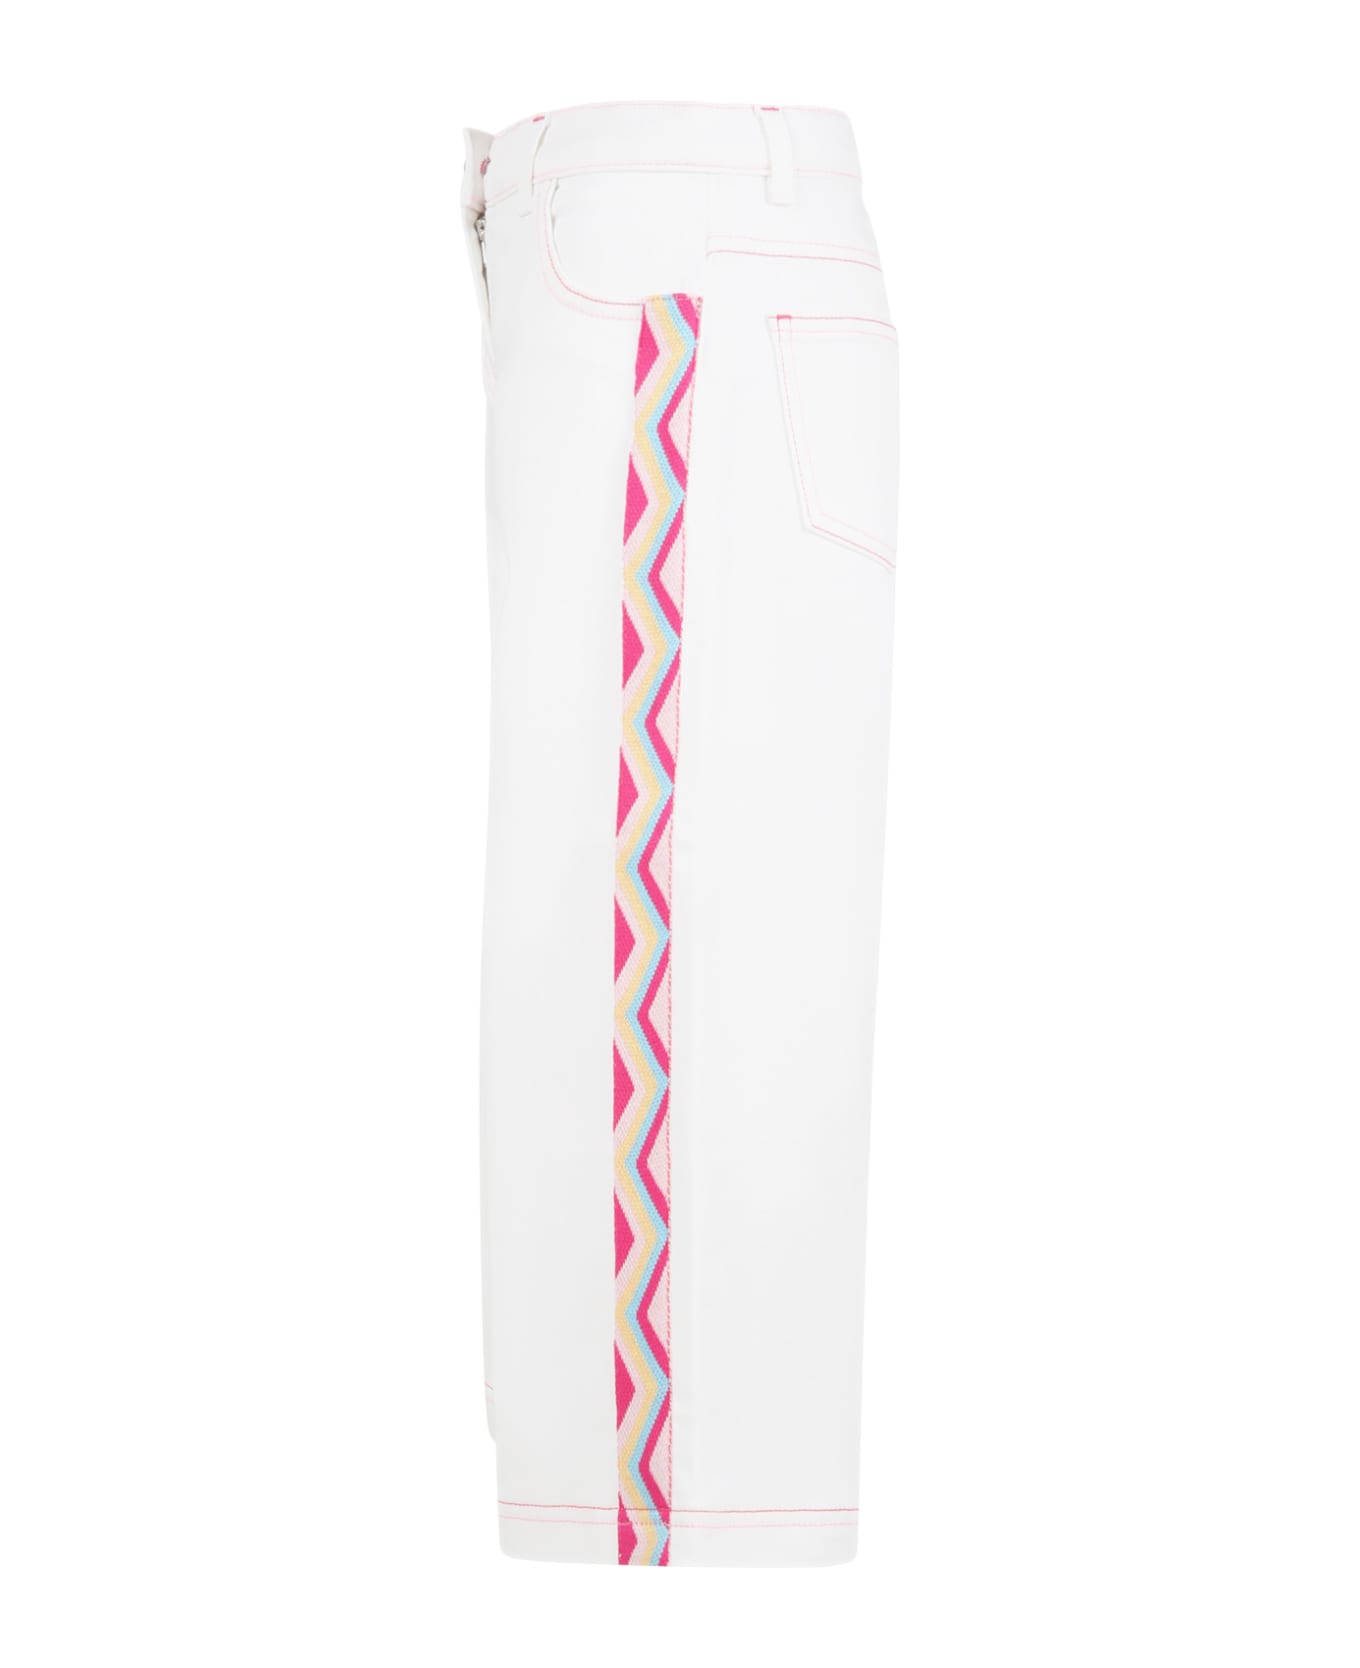 Missoni Kids White Jeans For Girl With Iconic Chevron Pattern - White ボトムス